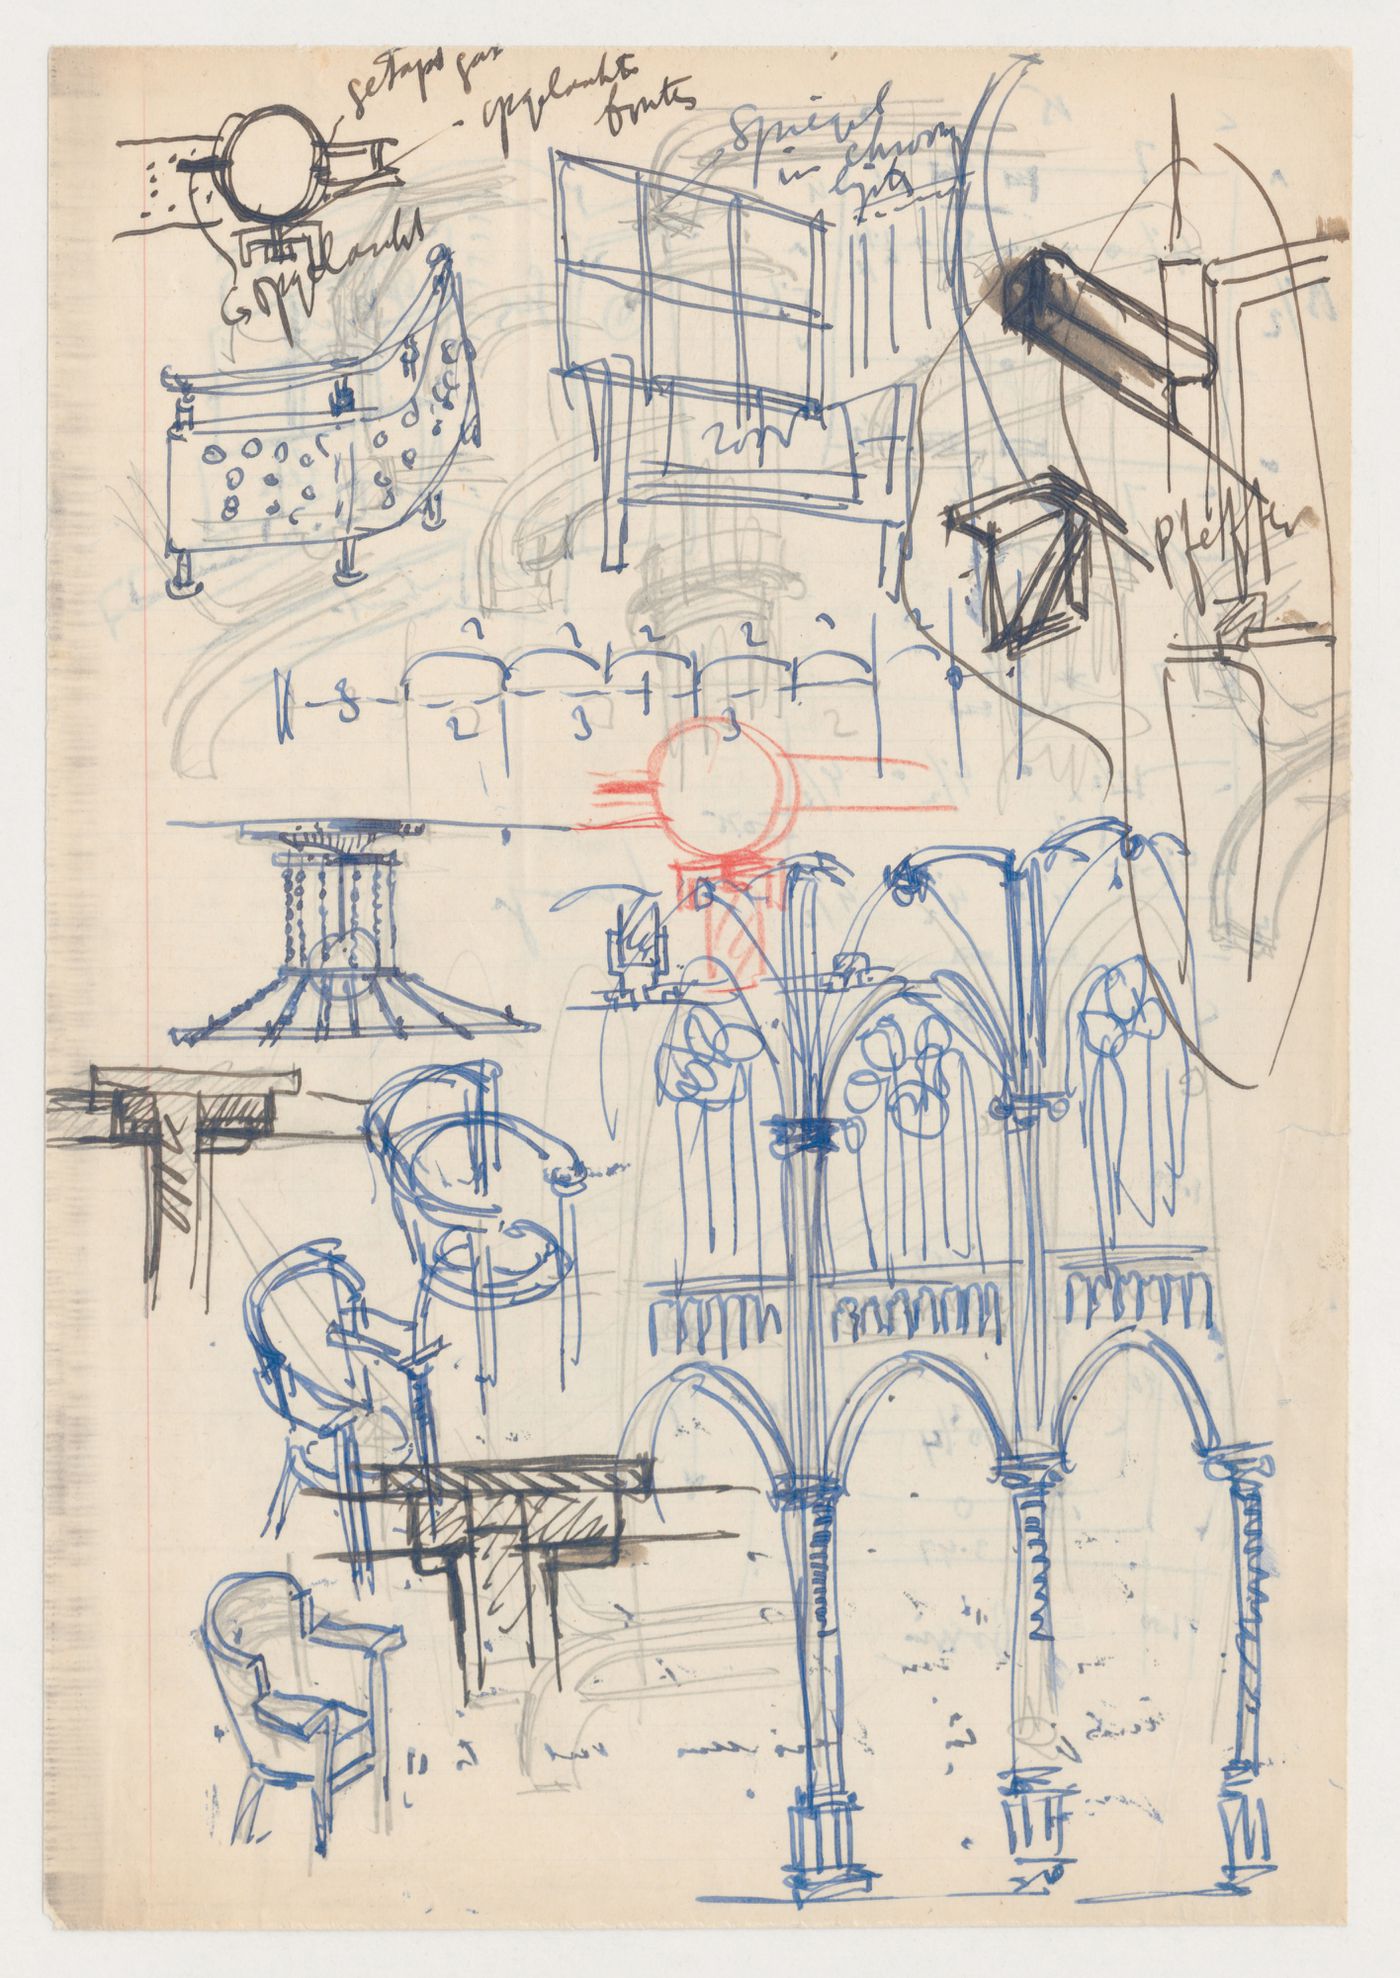 Sketches for a colonnade, a ceiling fixture, a window and chairs, and sections for unidentified details, possibly for Metz & Co., Amsterdam; verso: Sketch perspective and sketch plans possibly for the interior of the S.s. Nieuw Amsterdam